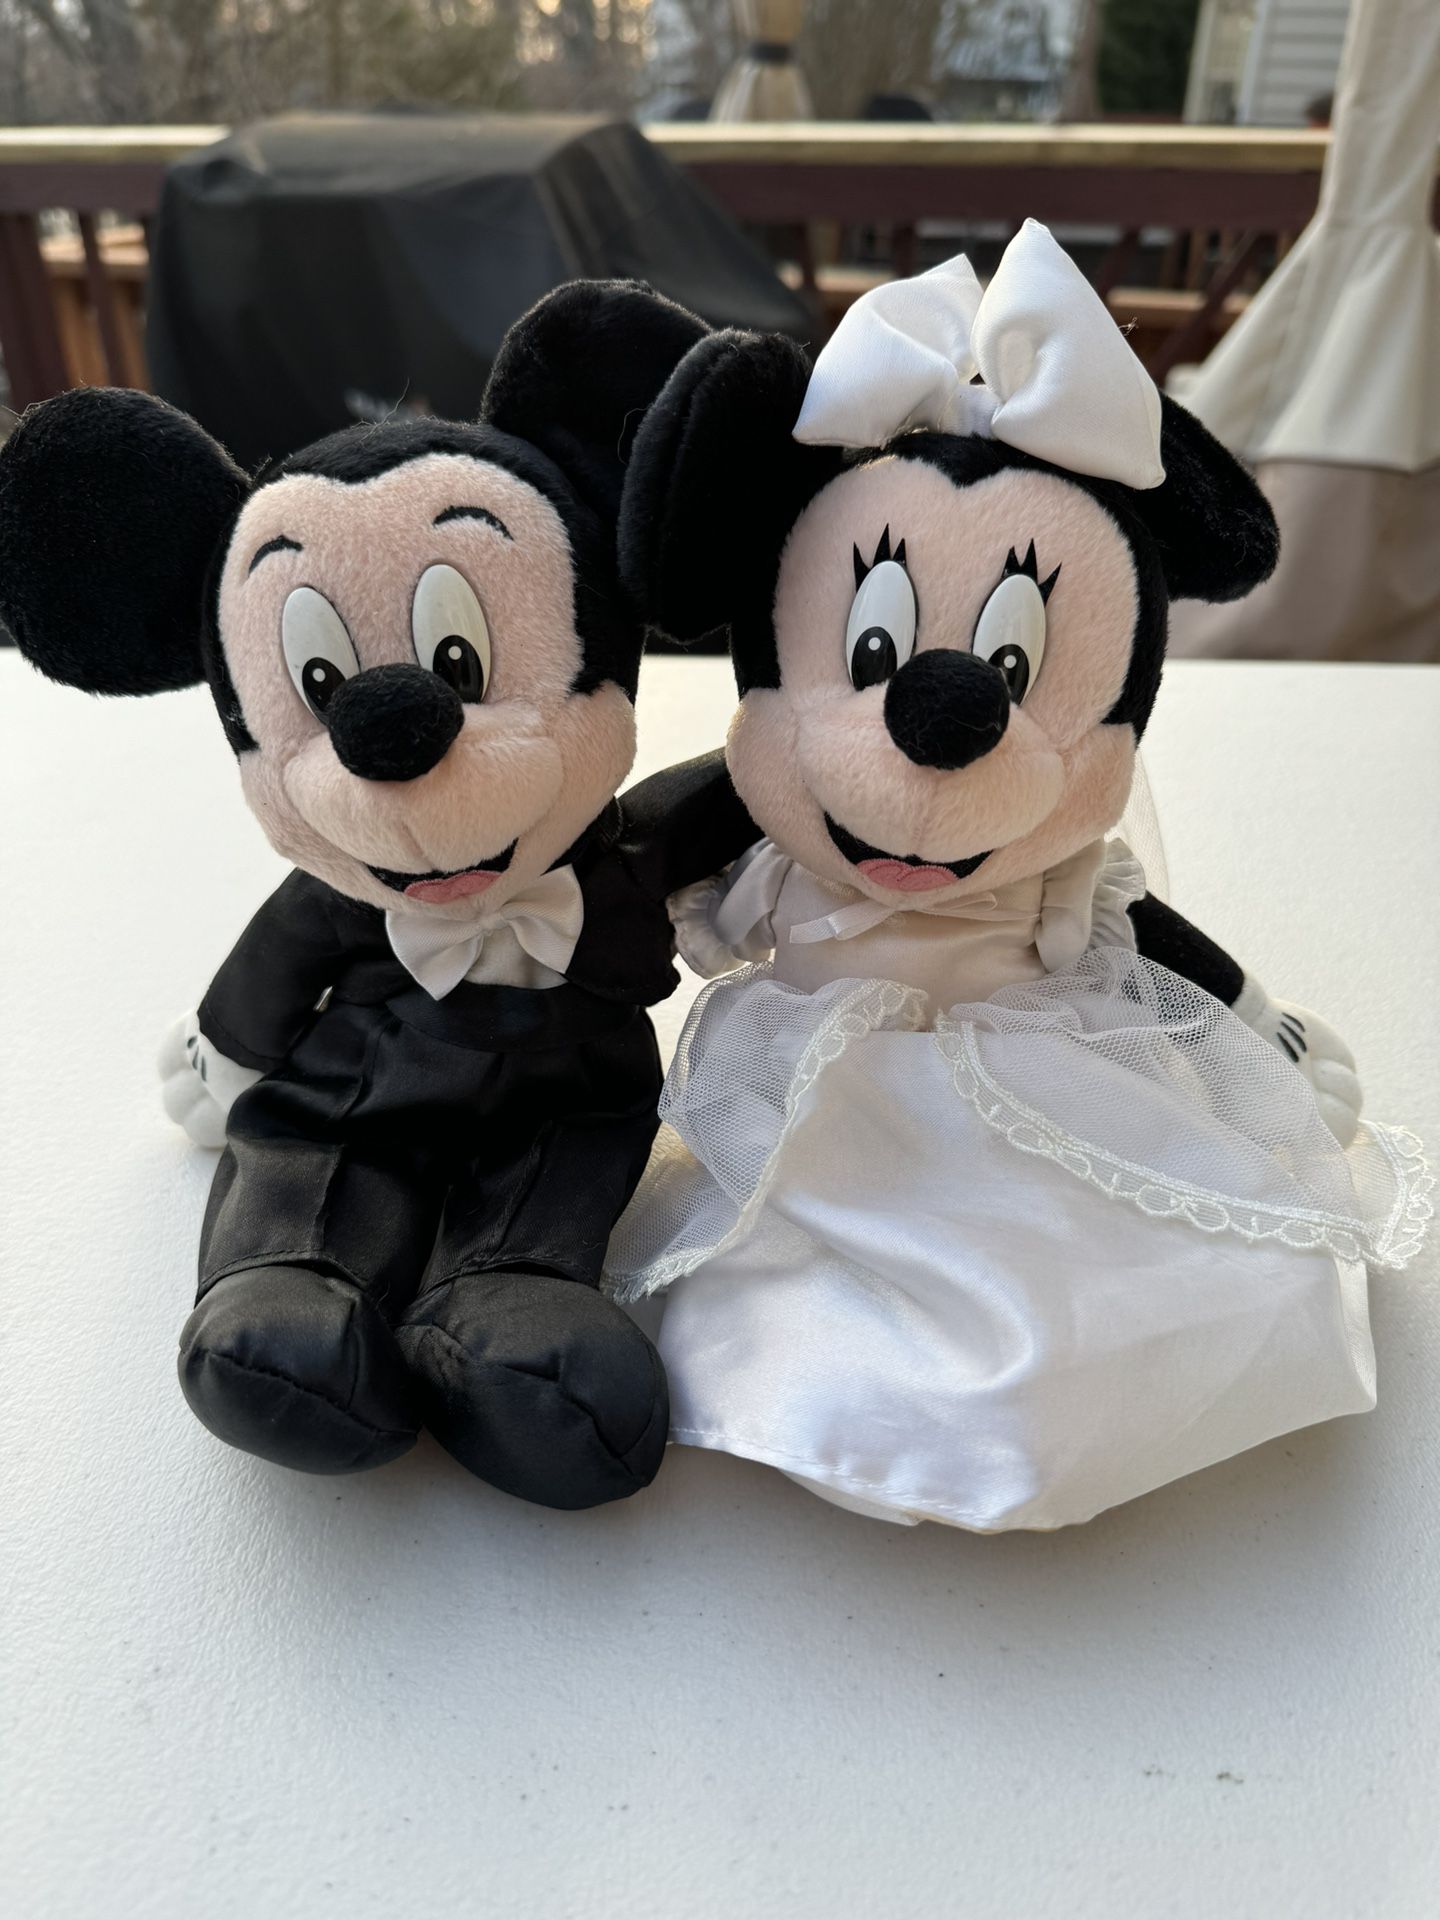 Mickey and Minnie Mouse Bride & Groom dolls